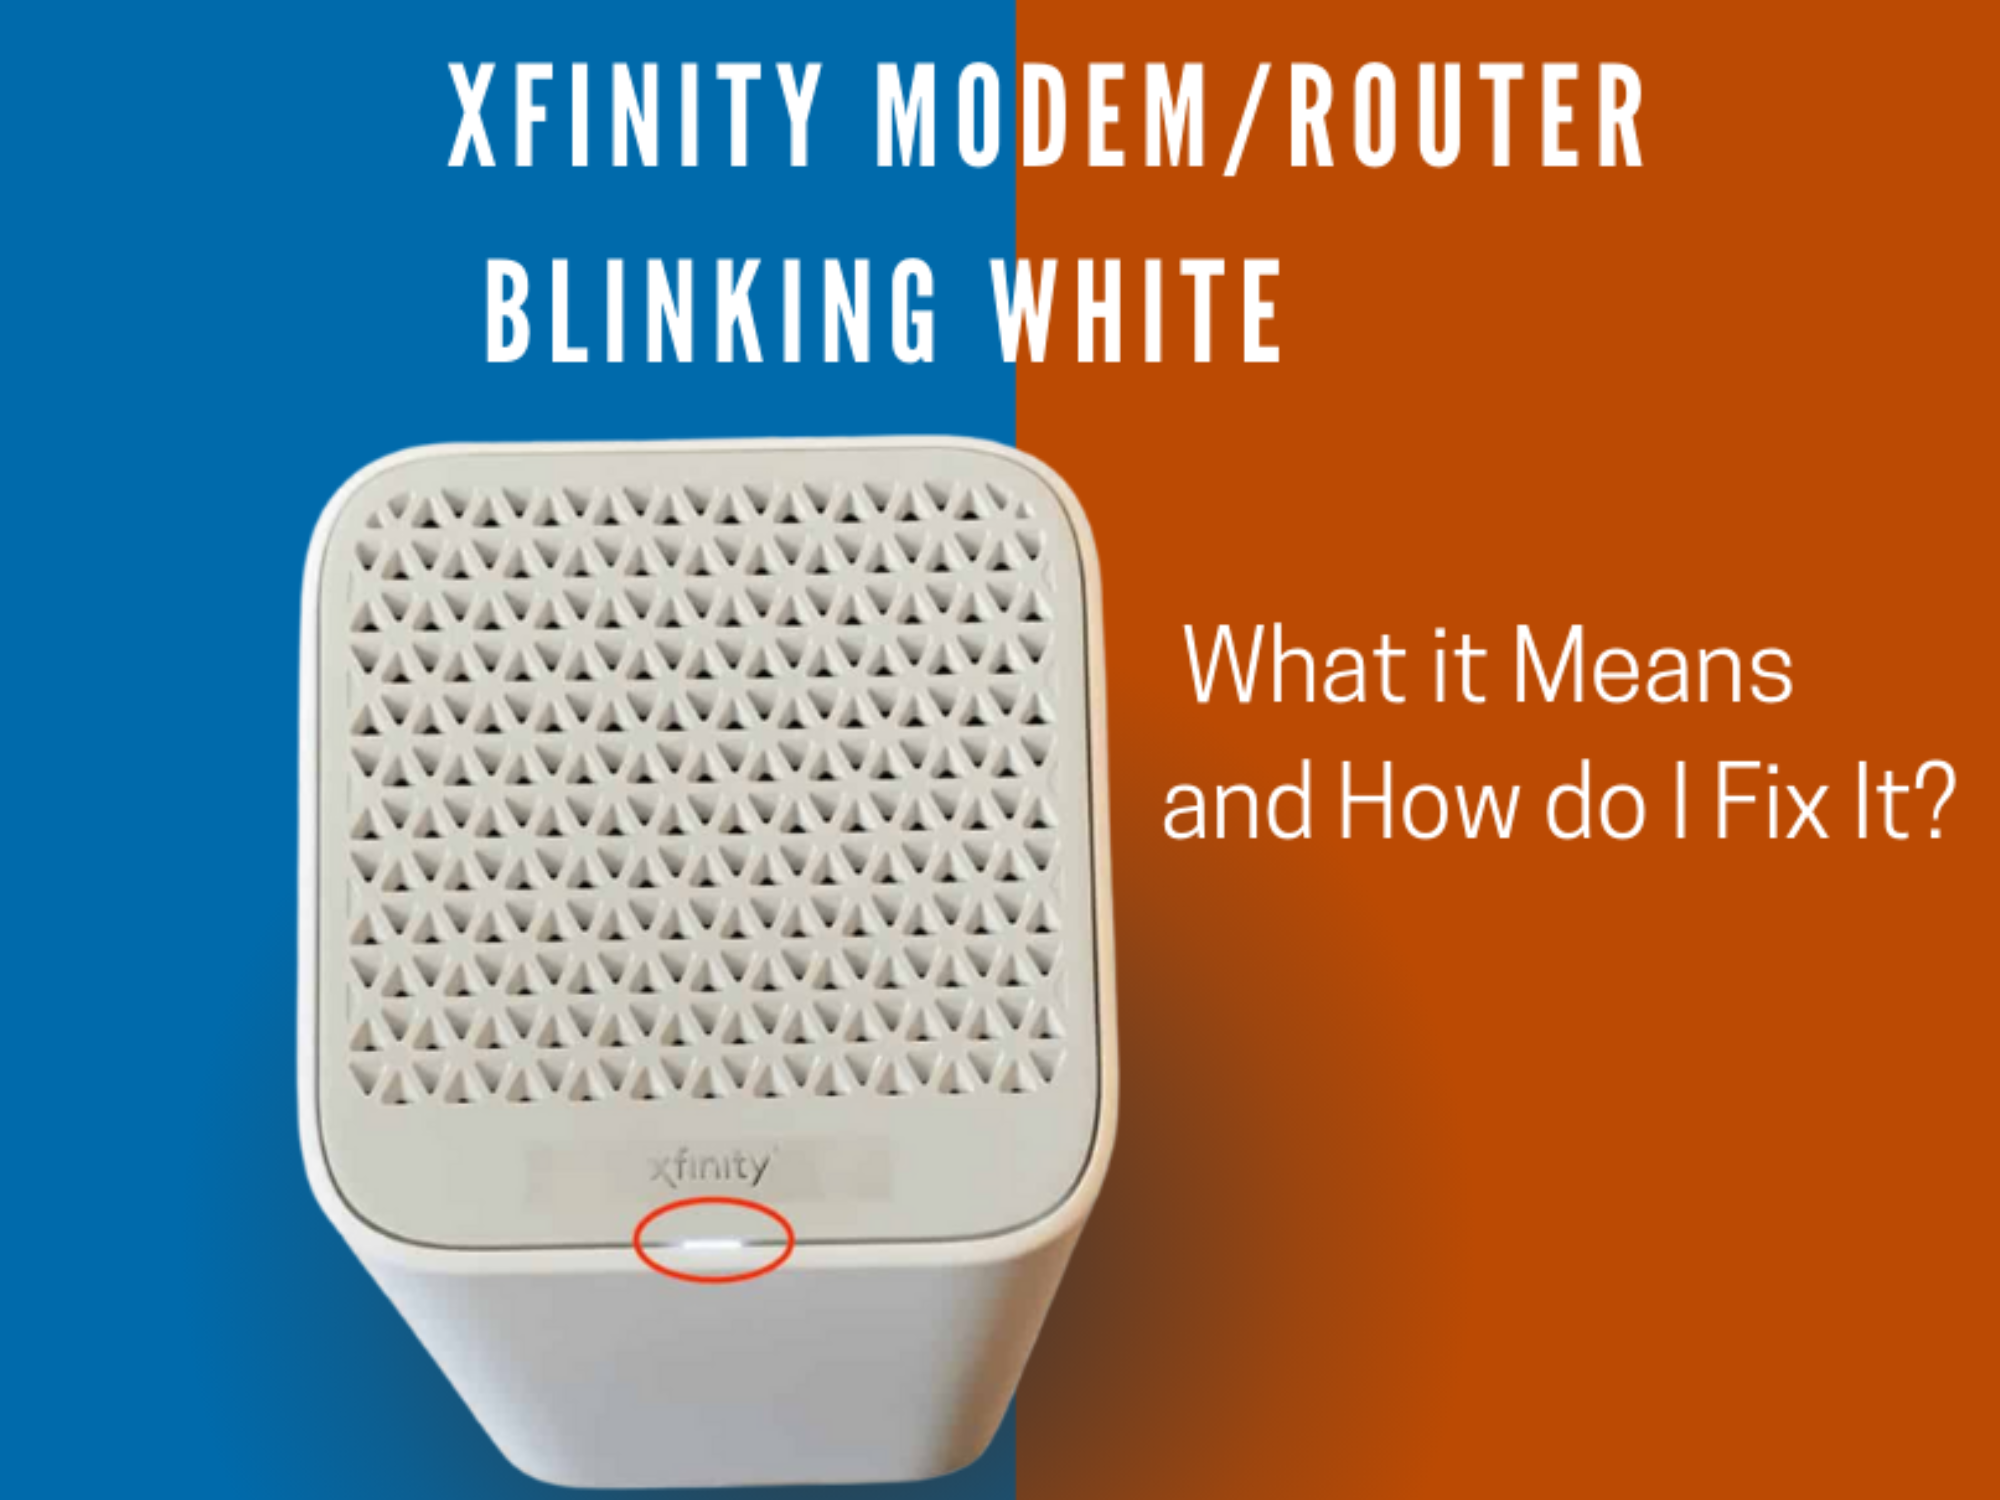 How to Fix an Xfinity Modem/Router Blinking White